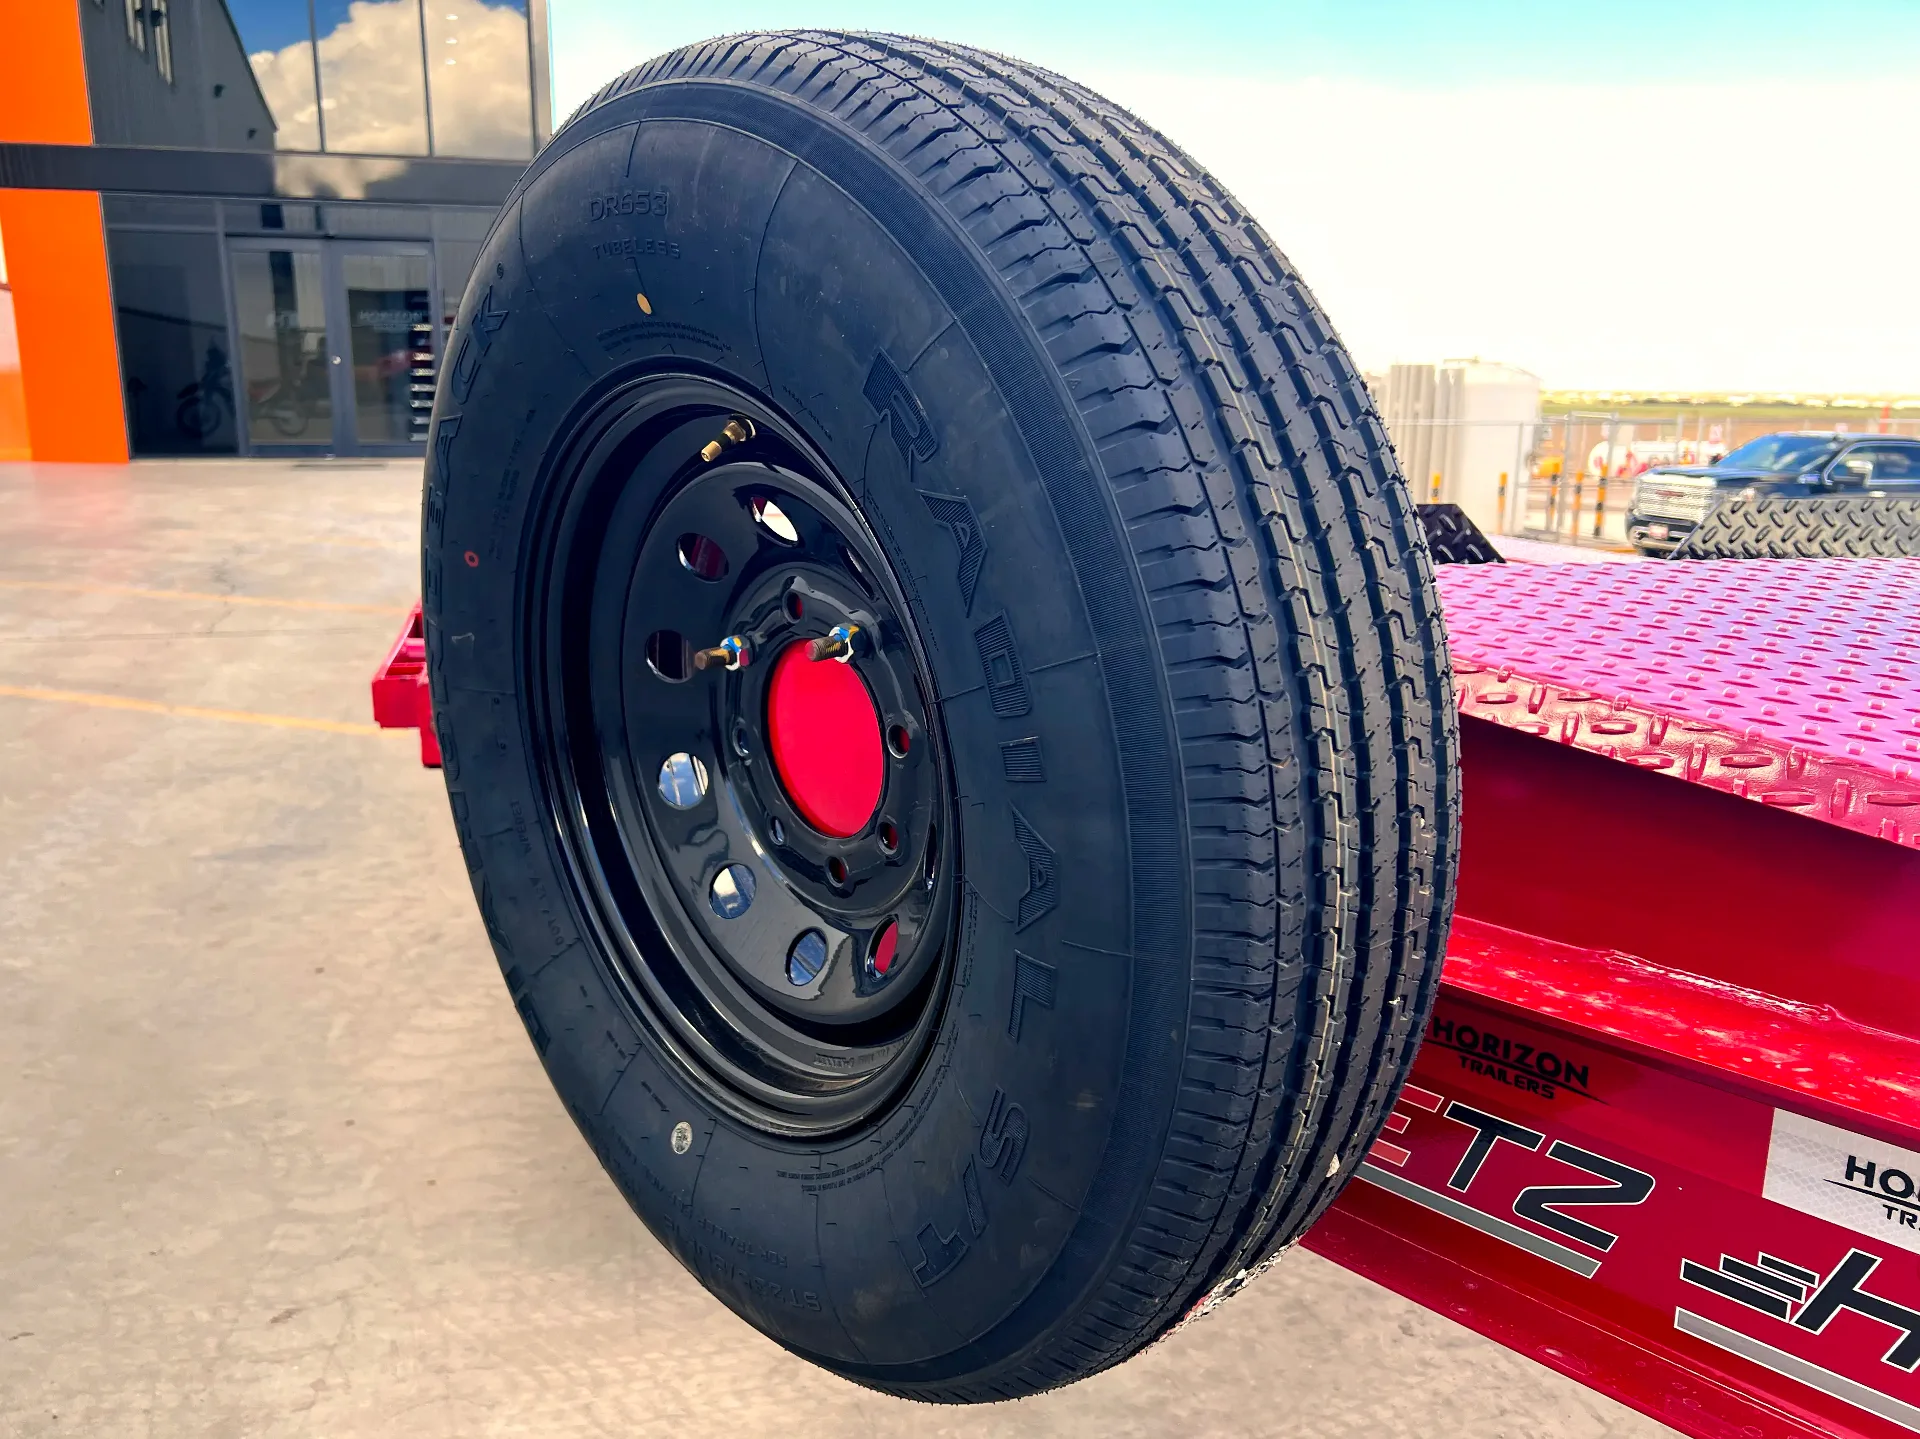 Spare Tire and Mount on Equipment Trailer